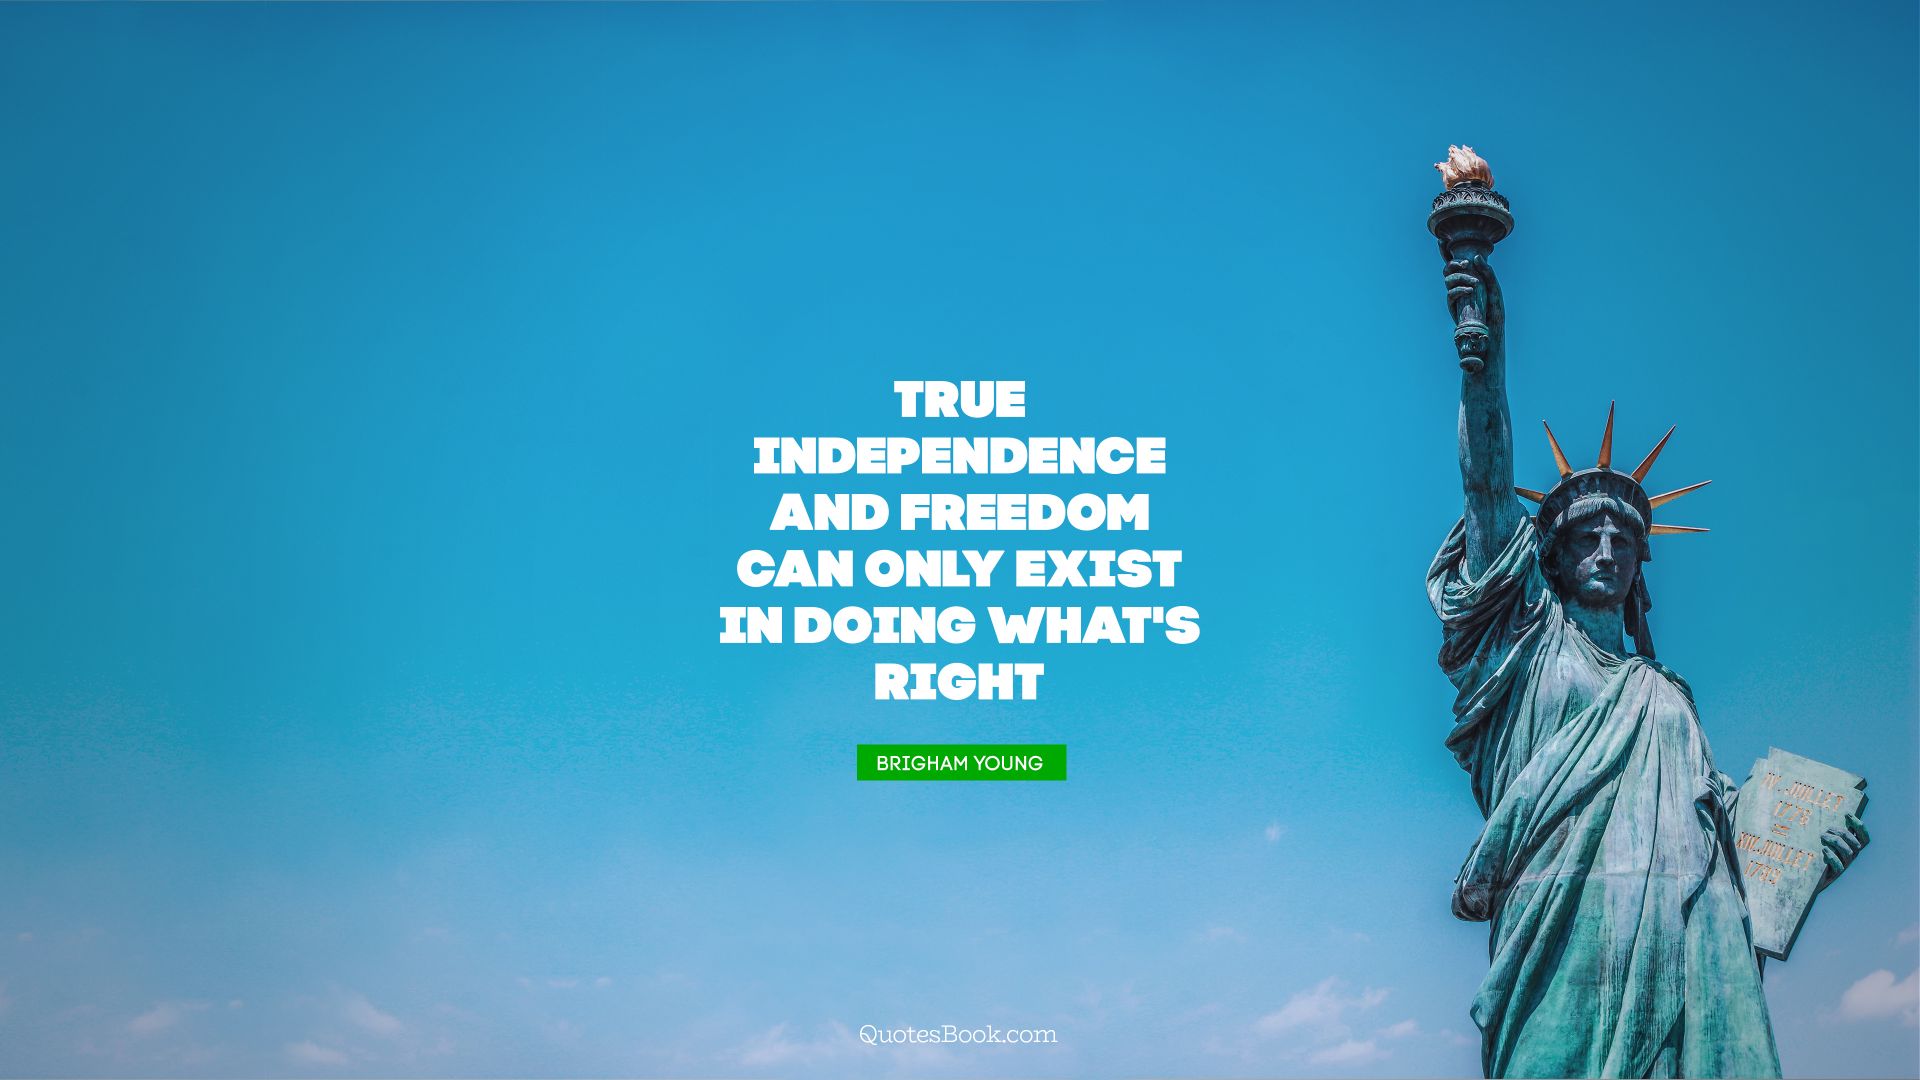 True independence and freedom can only exist in doing what's right. - Quote by Brigham Young